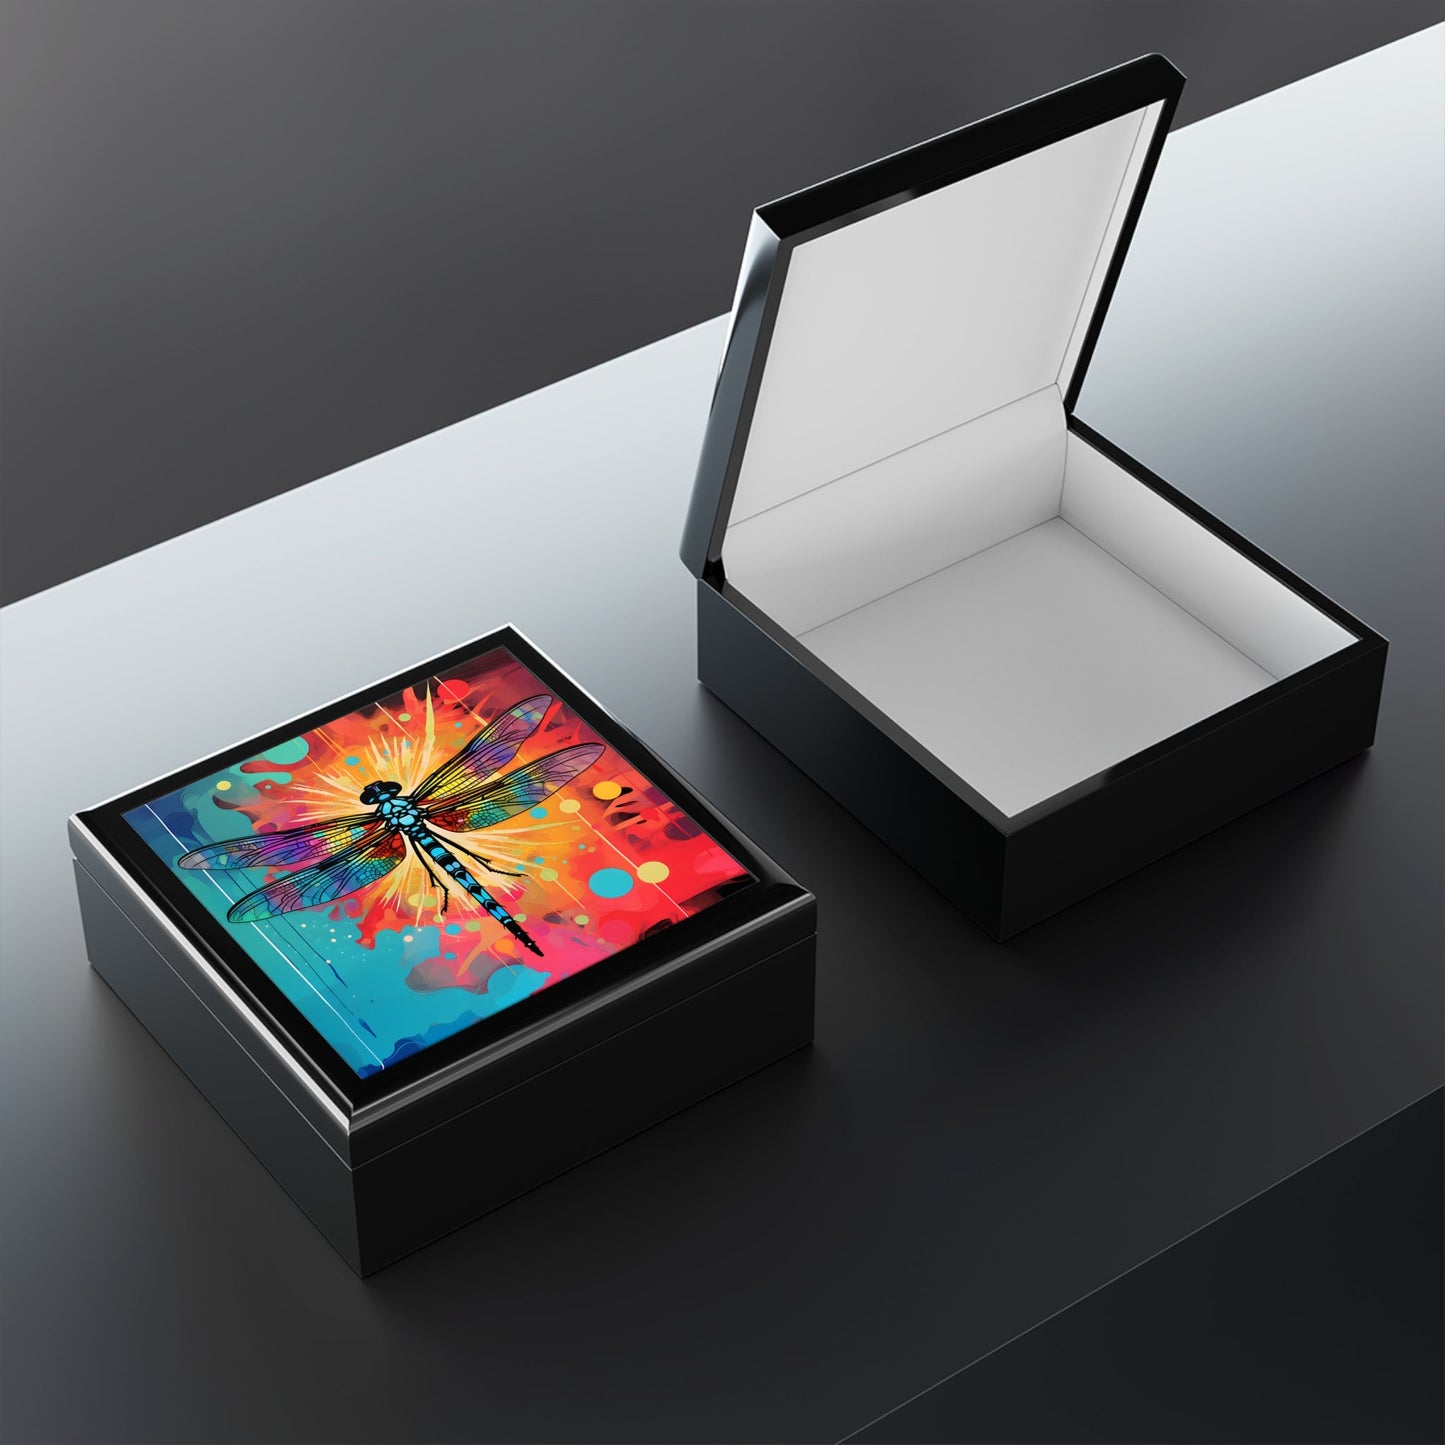 Pop Art Style Dragonfly Artwork Print Gift and Jewelry Box